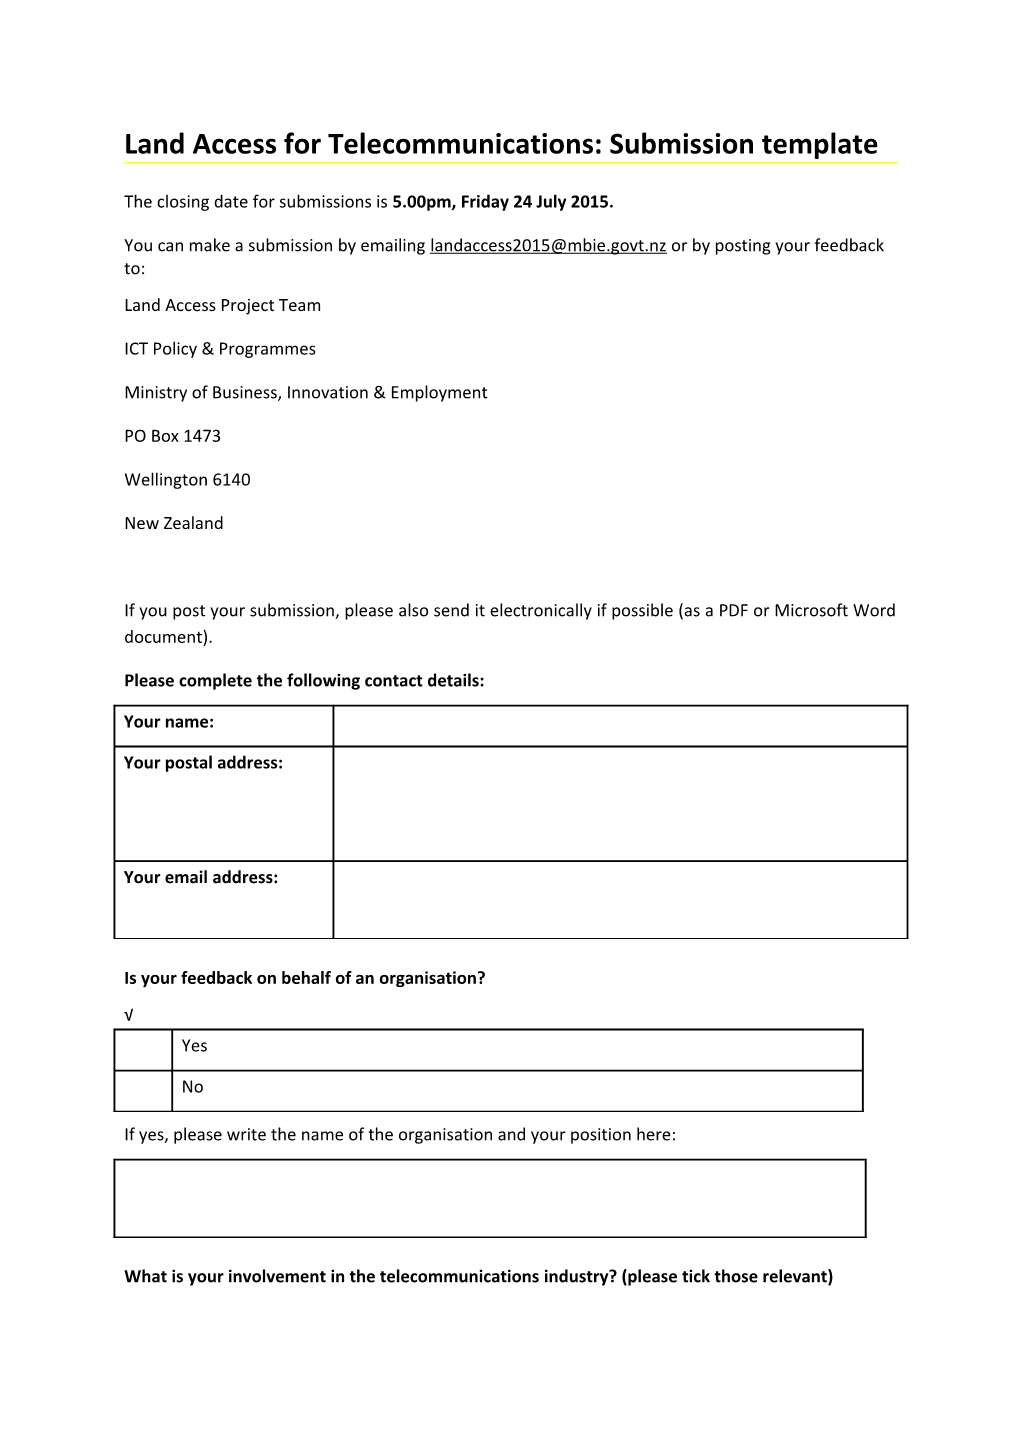 Land Access for Telecommunications: Submission Template